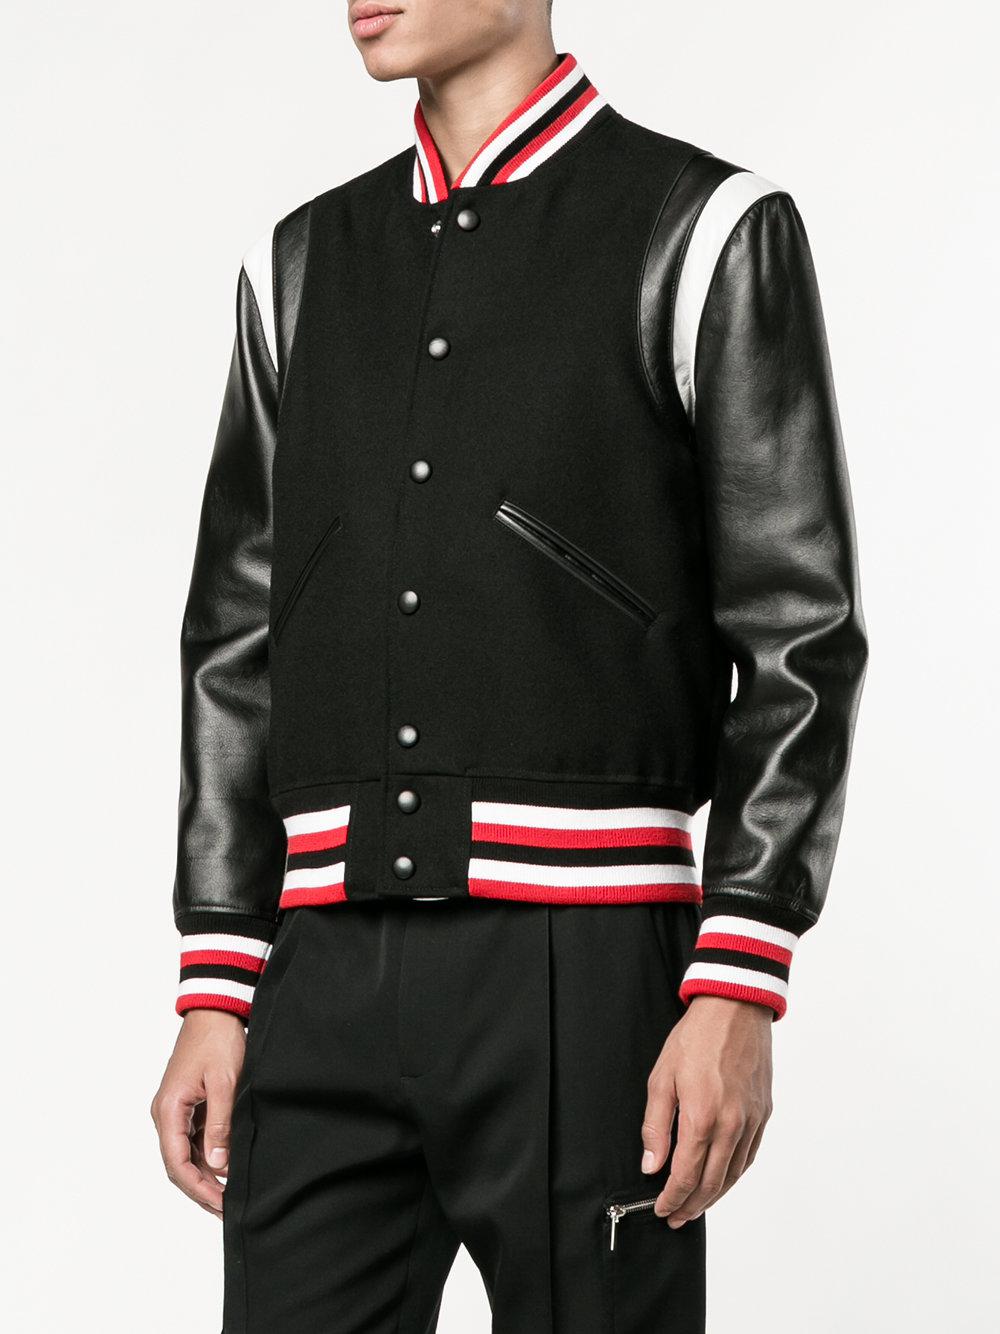 Lyst - Givenchy Striped College Jacket in Black for Men